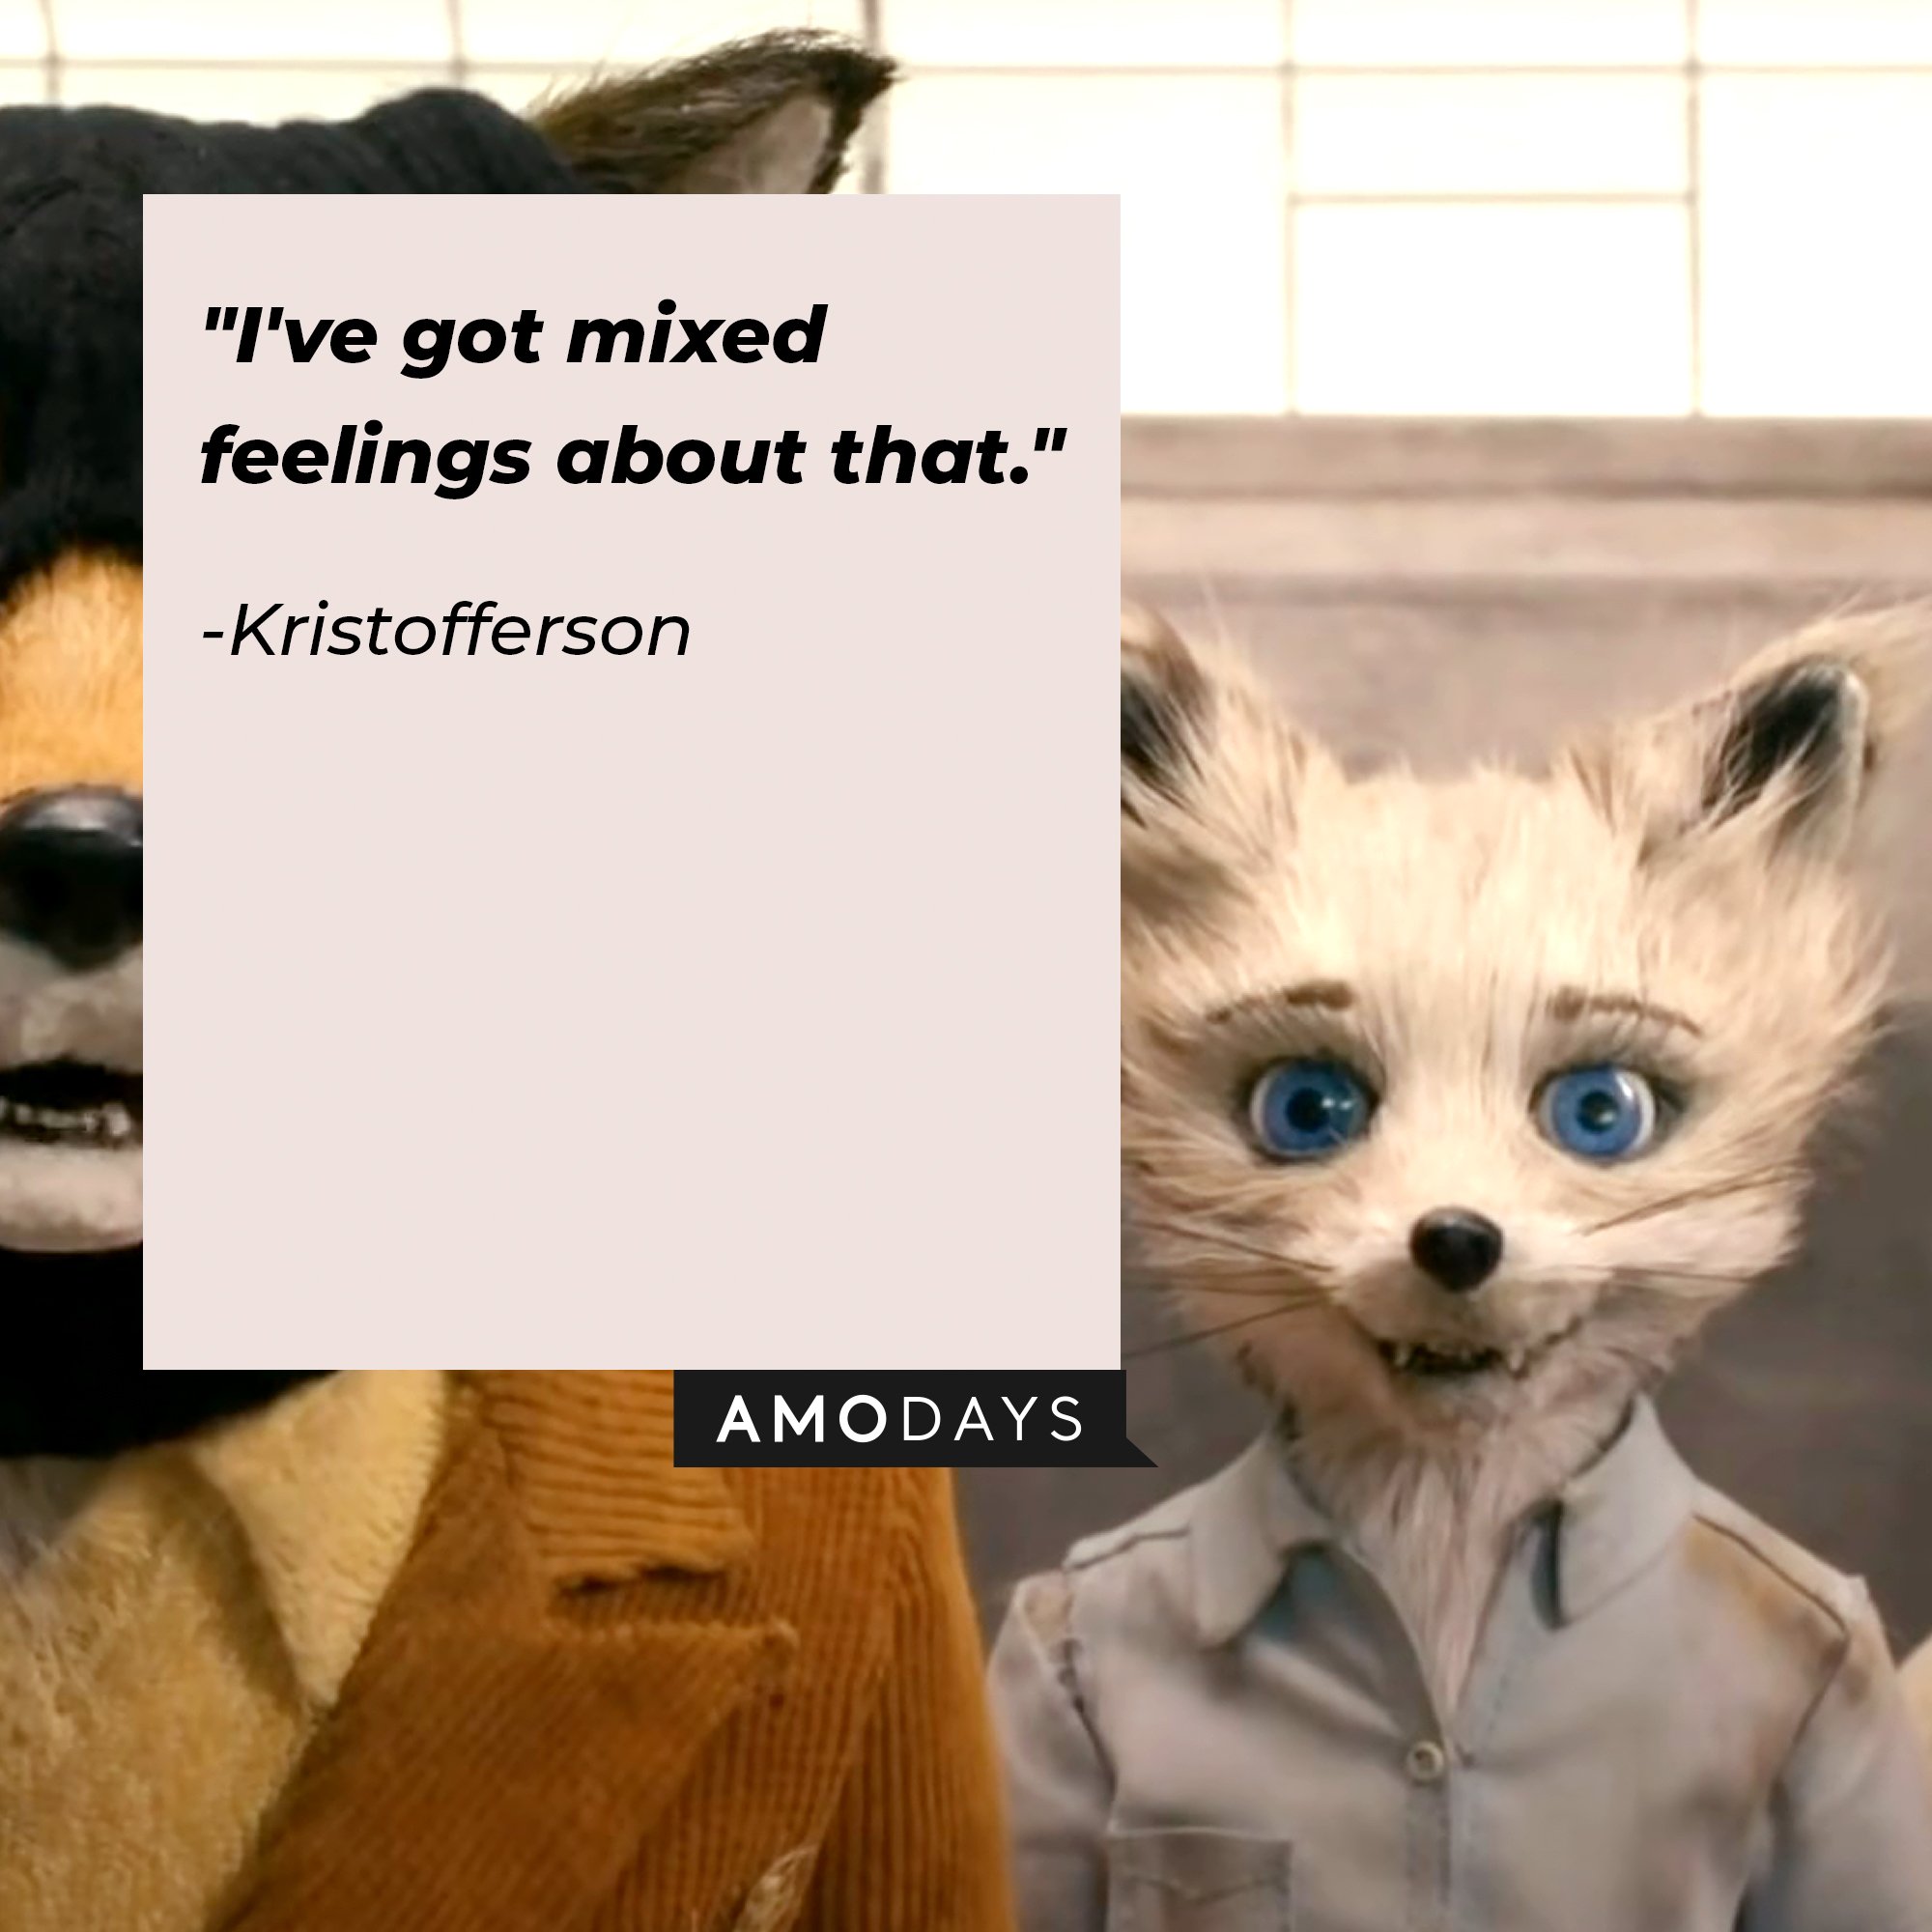 Kristofferson’s Quote: "I've got mixed feelings about that." | Image: AmoDays